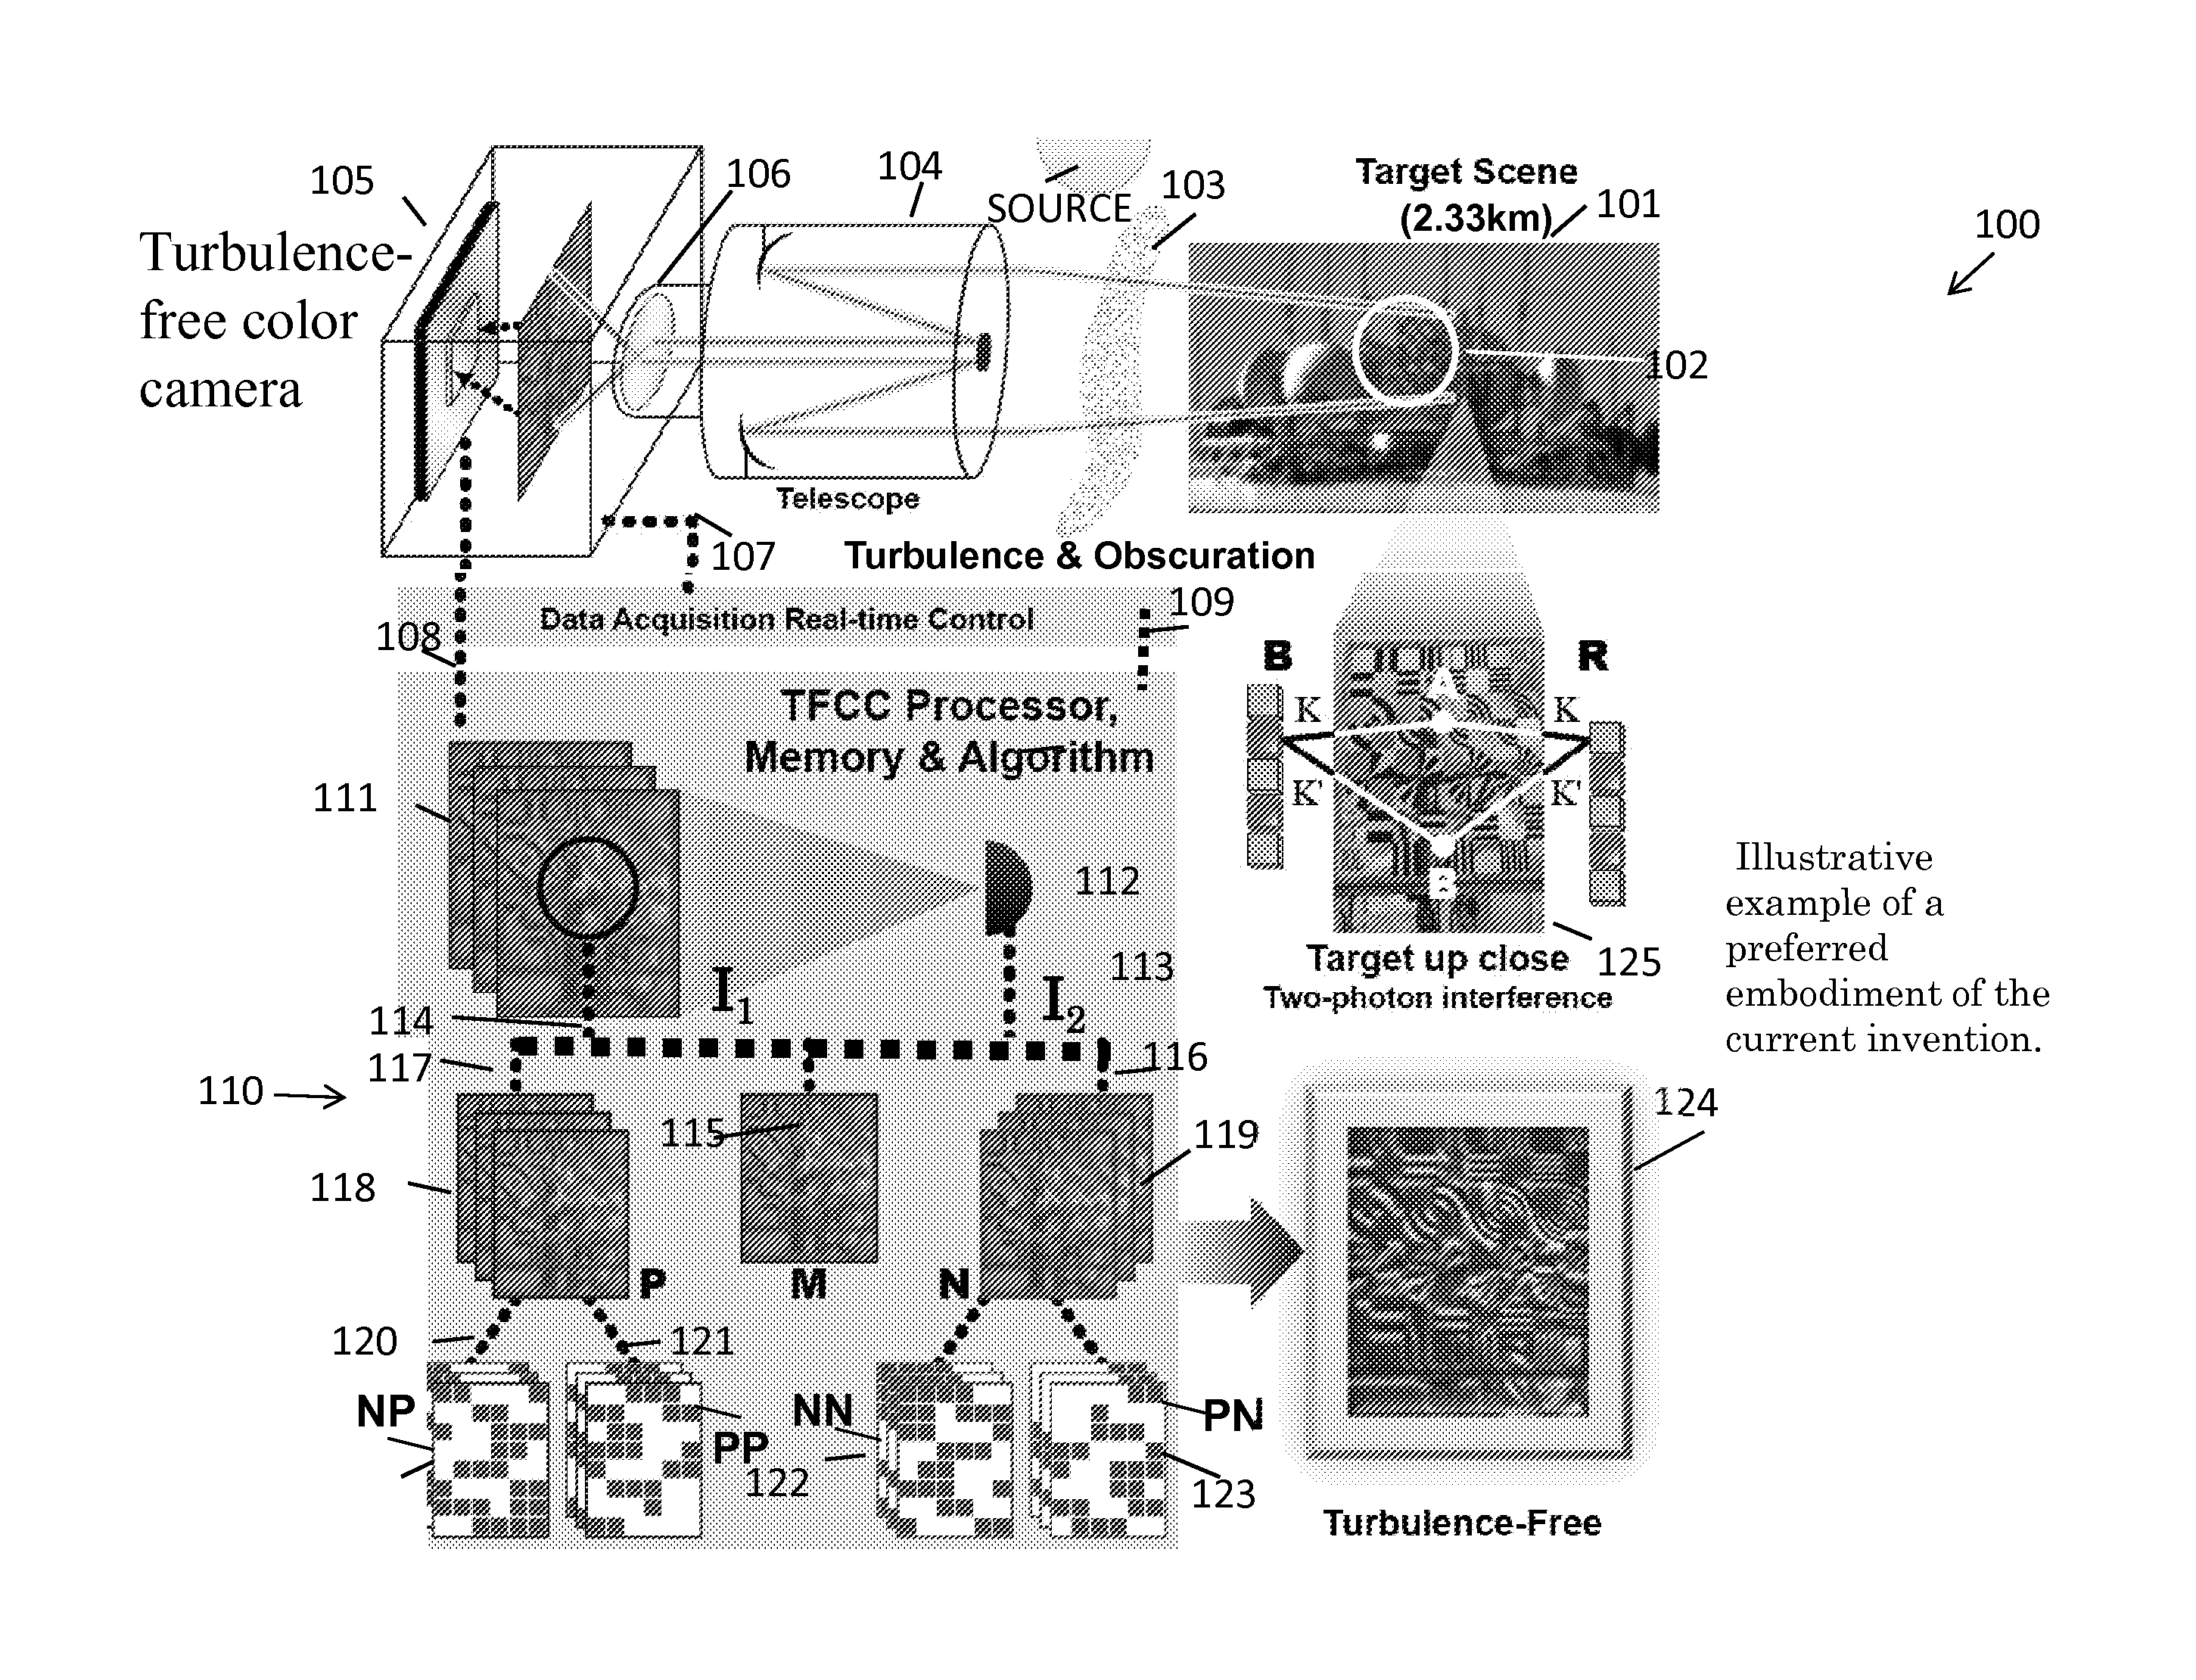 System and processor implemented method for improved image quality and generating an image of a target illuminated by quantum particles